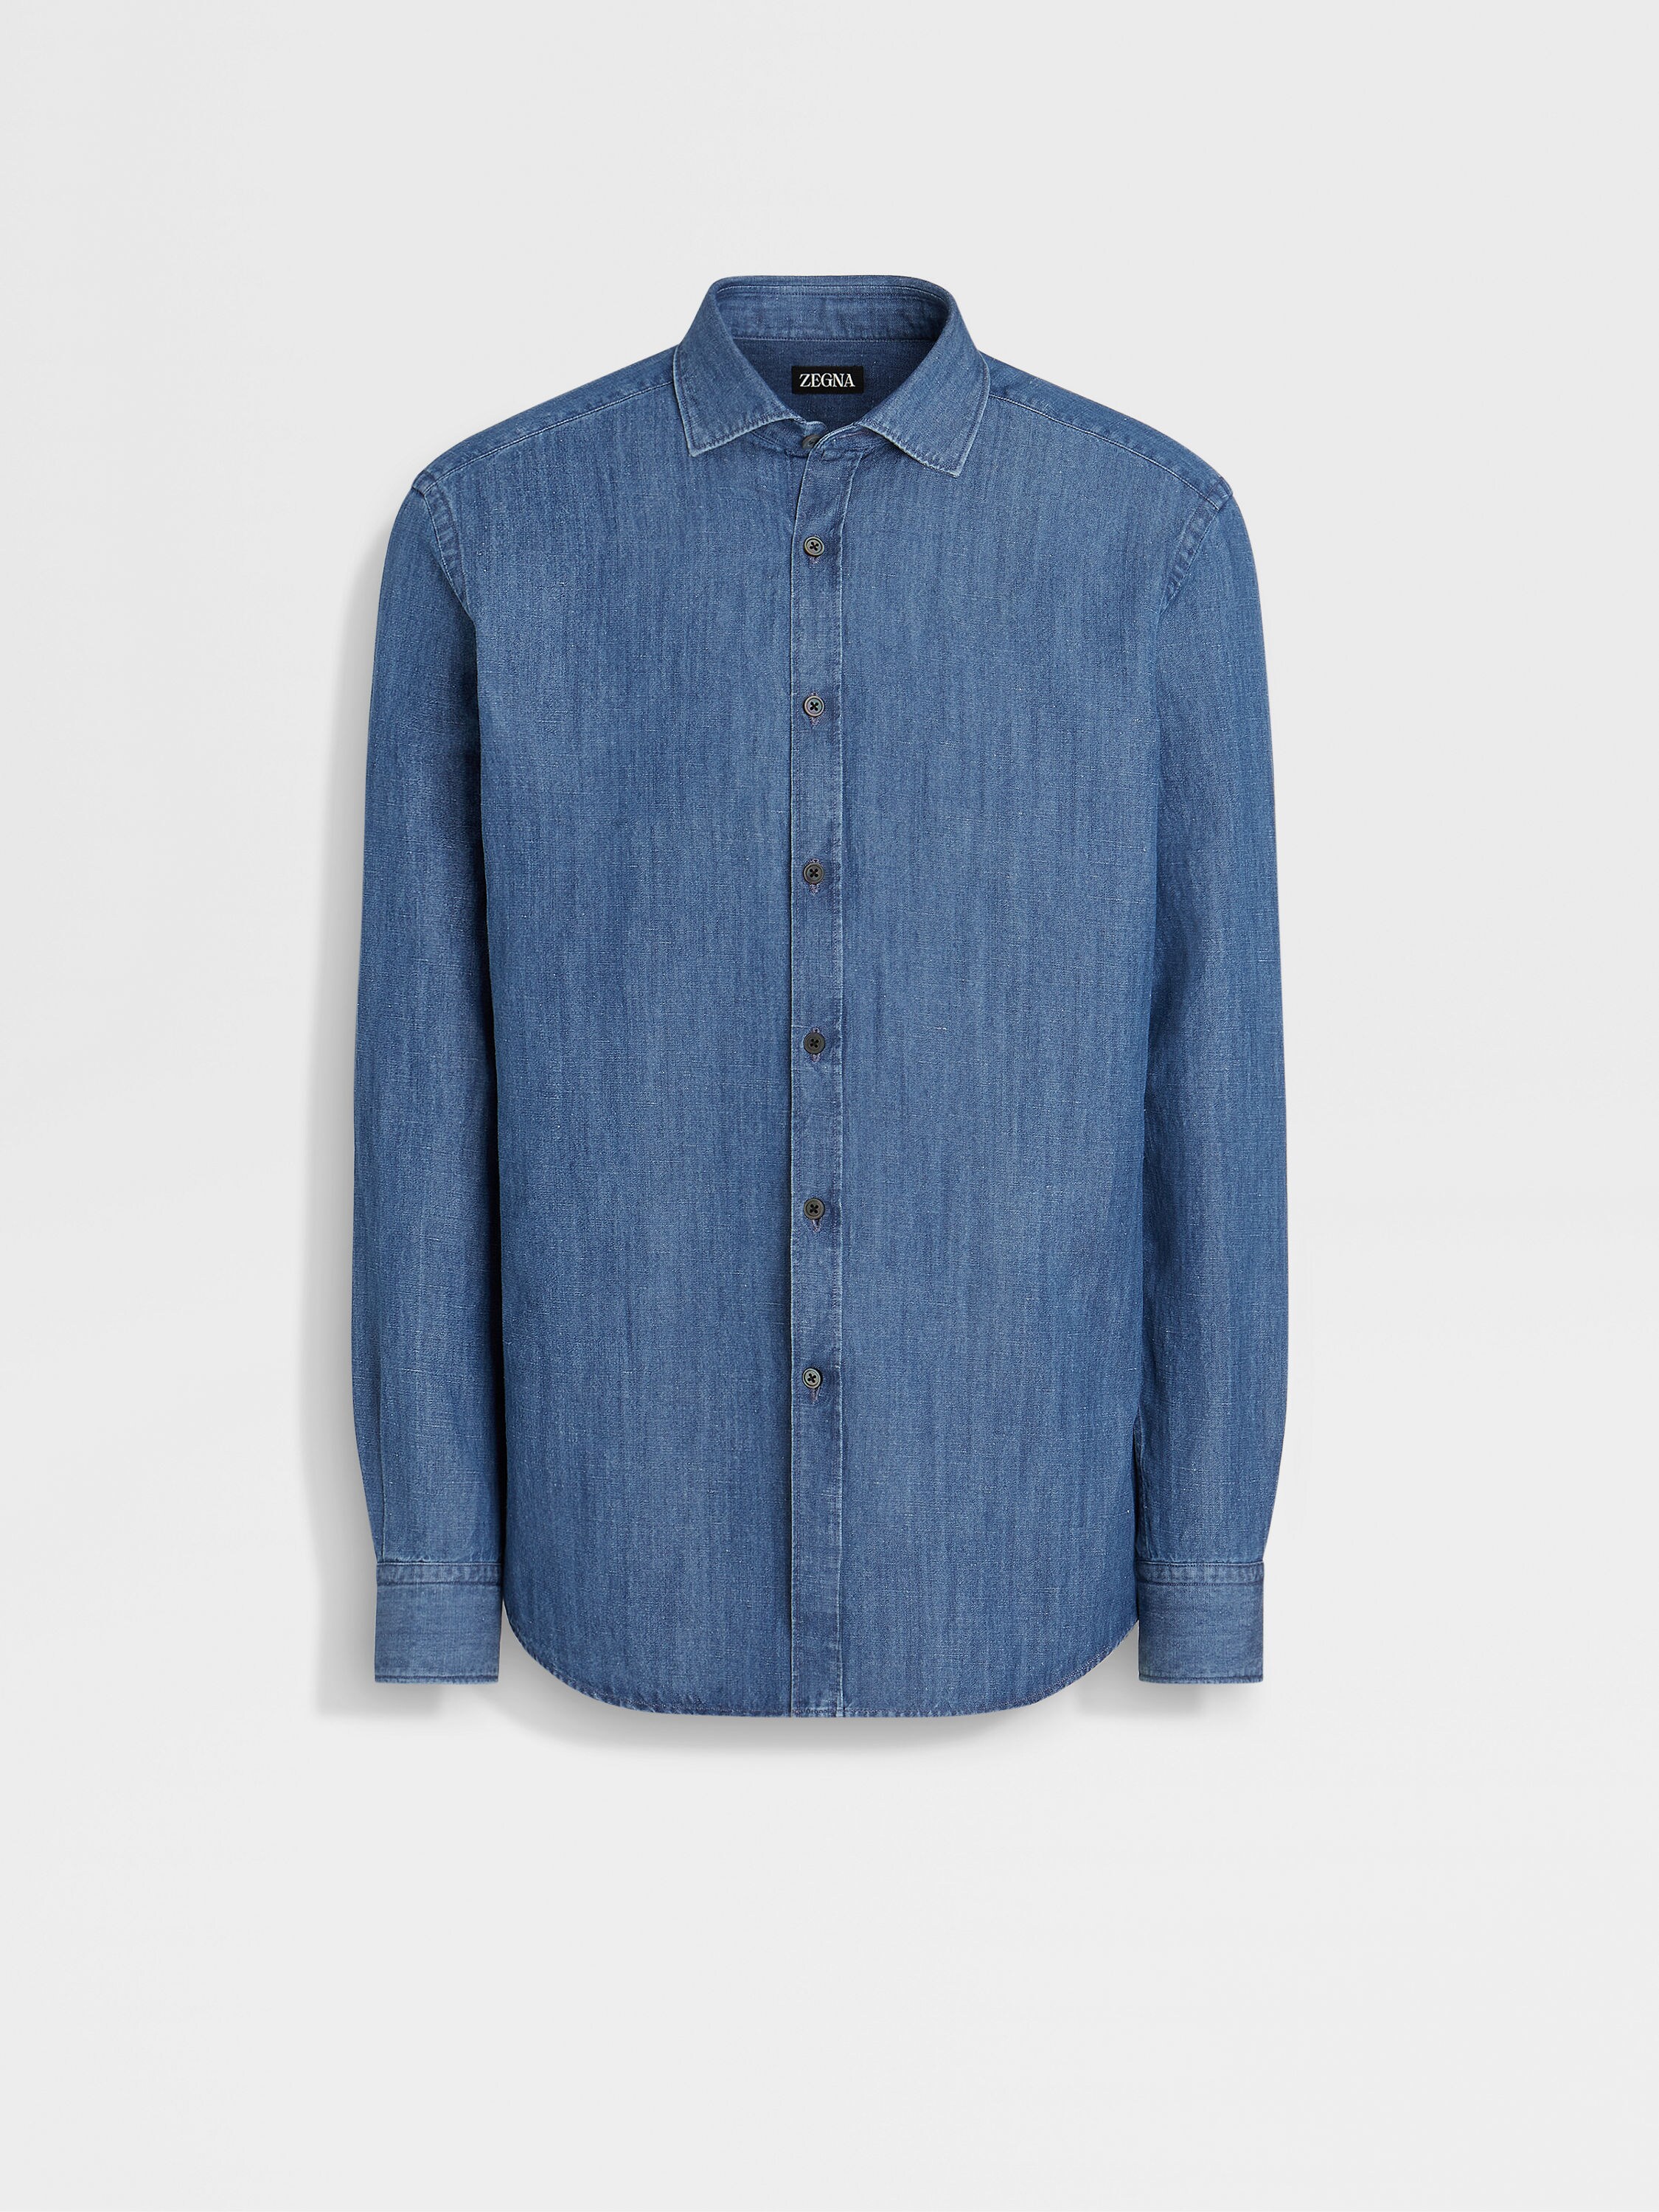 Blue Stone-washed Cotton and Linen Denim Shirt